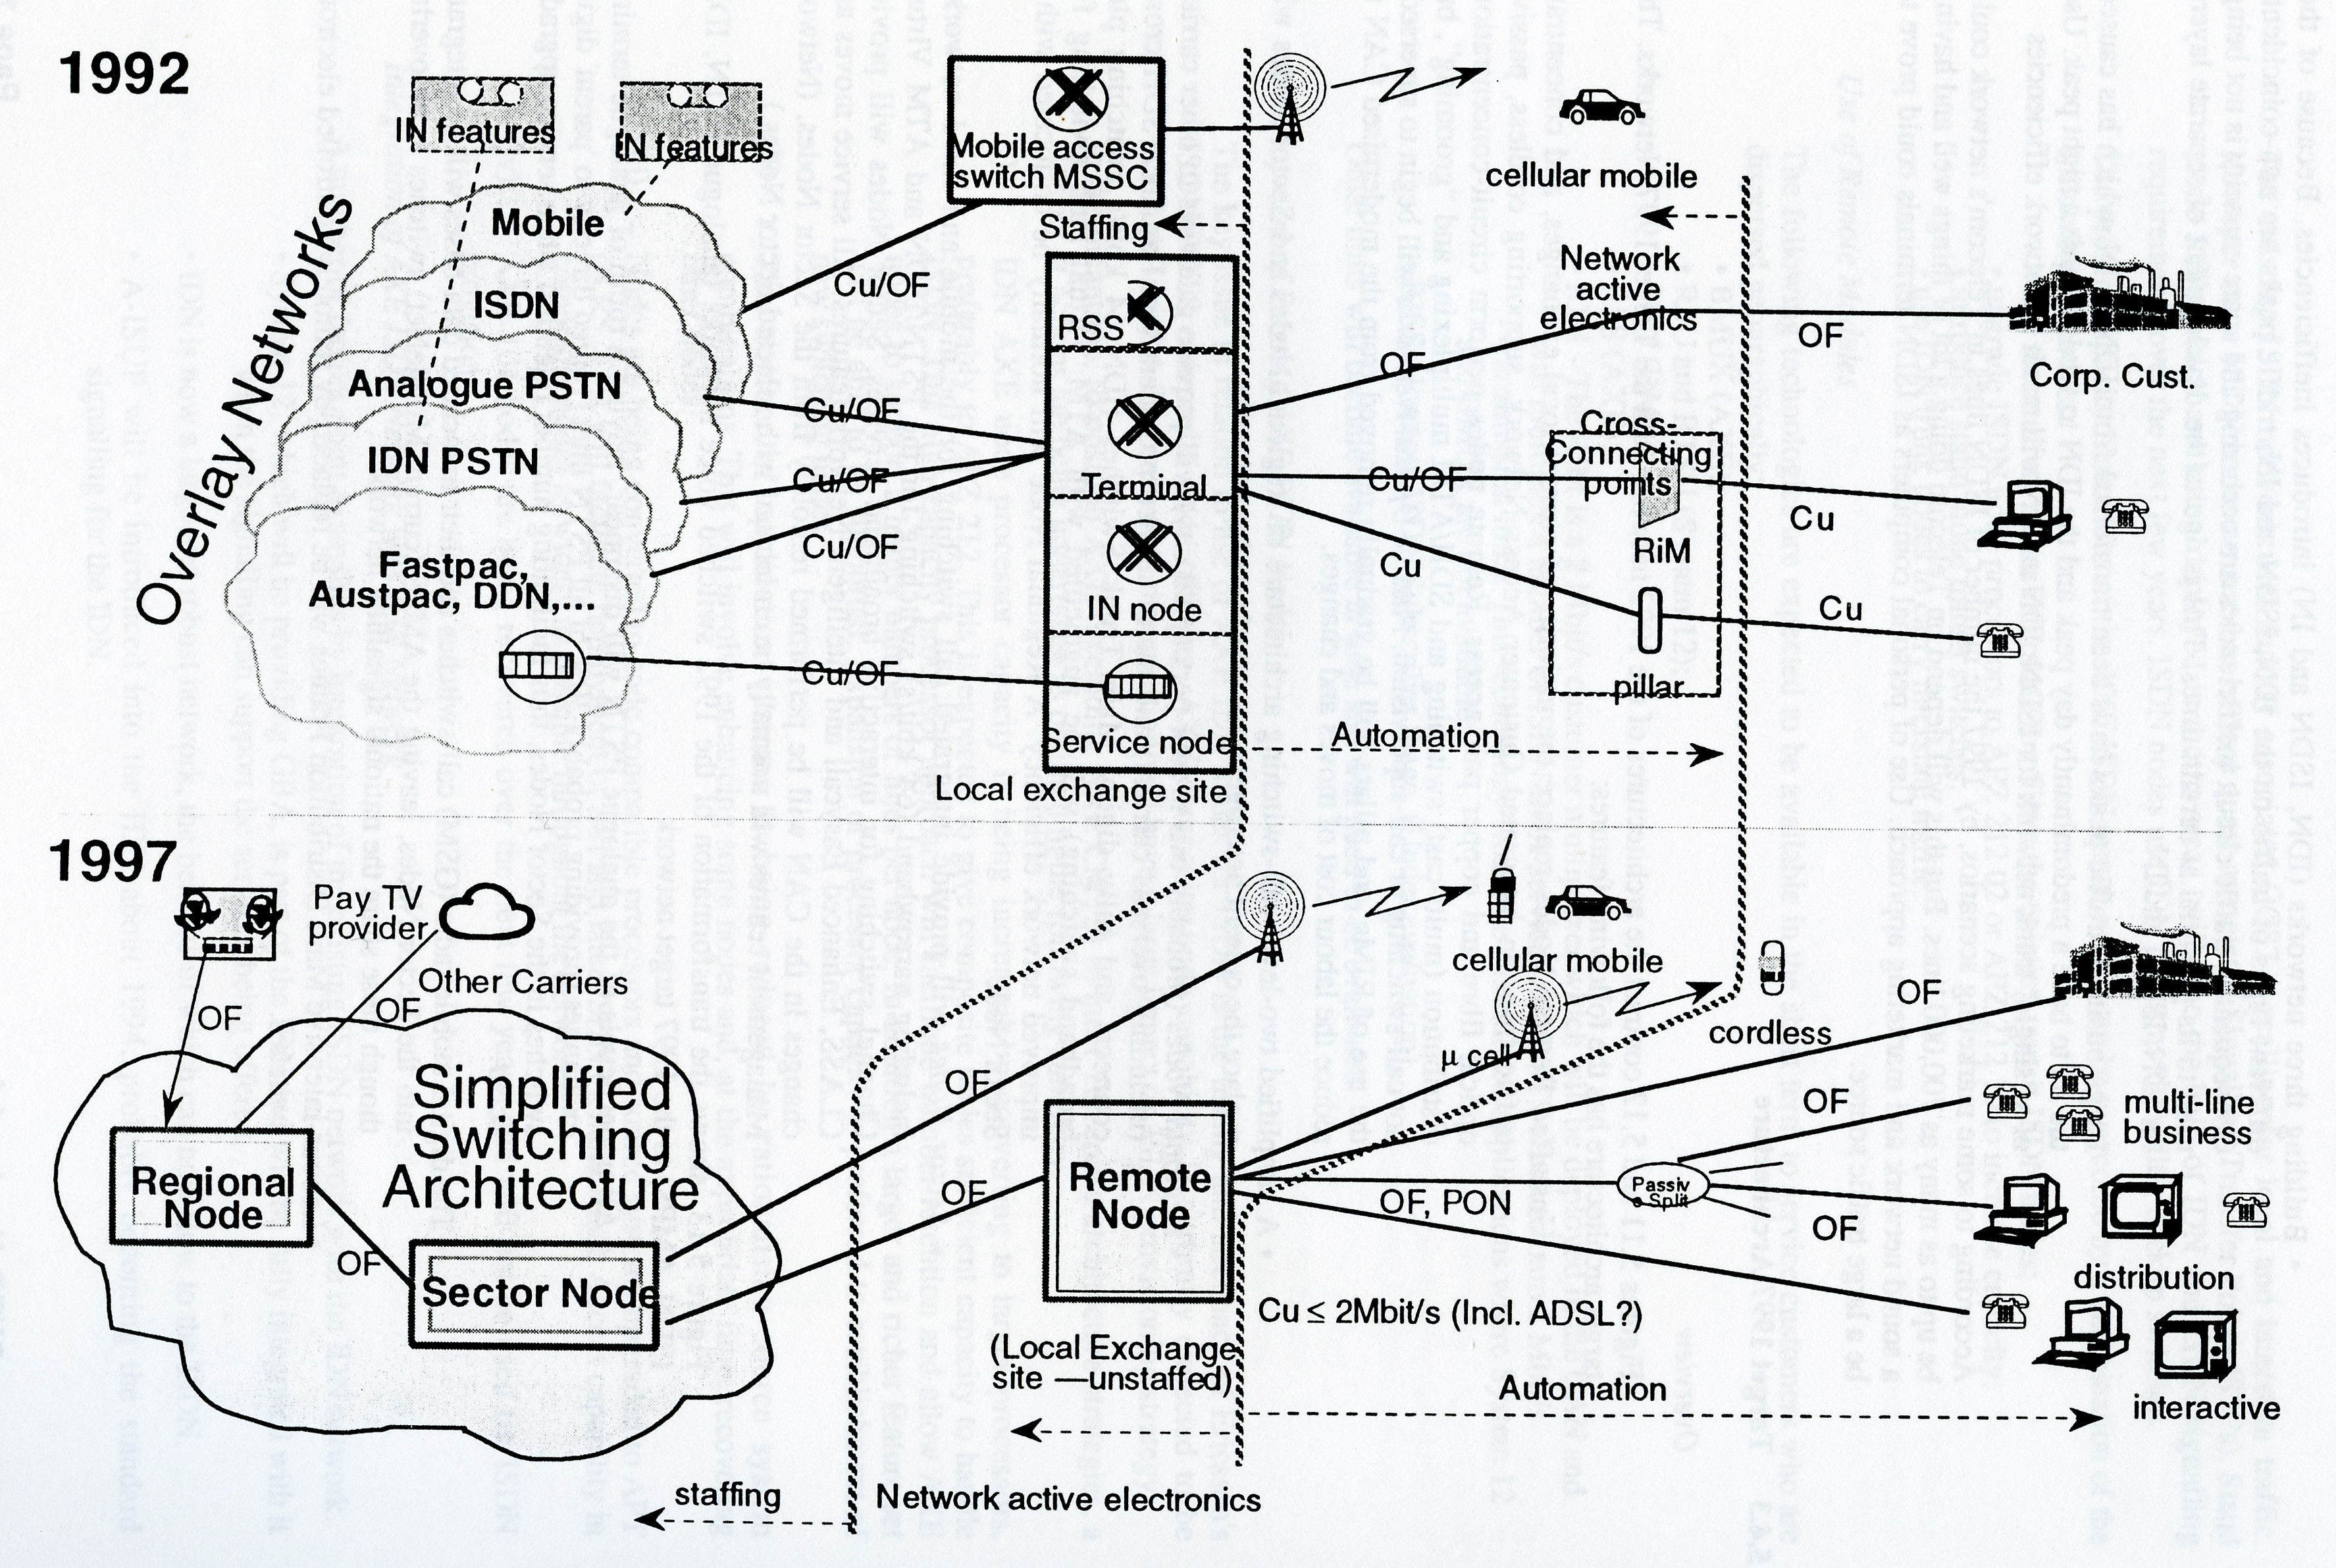 Figure 5. Target Network Architecture - 1992 to 1997